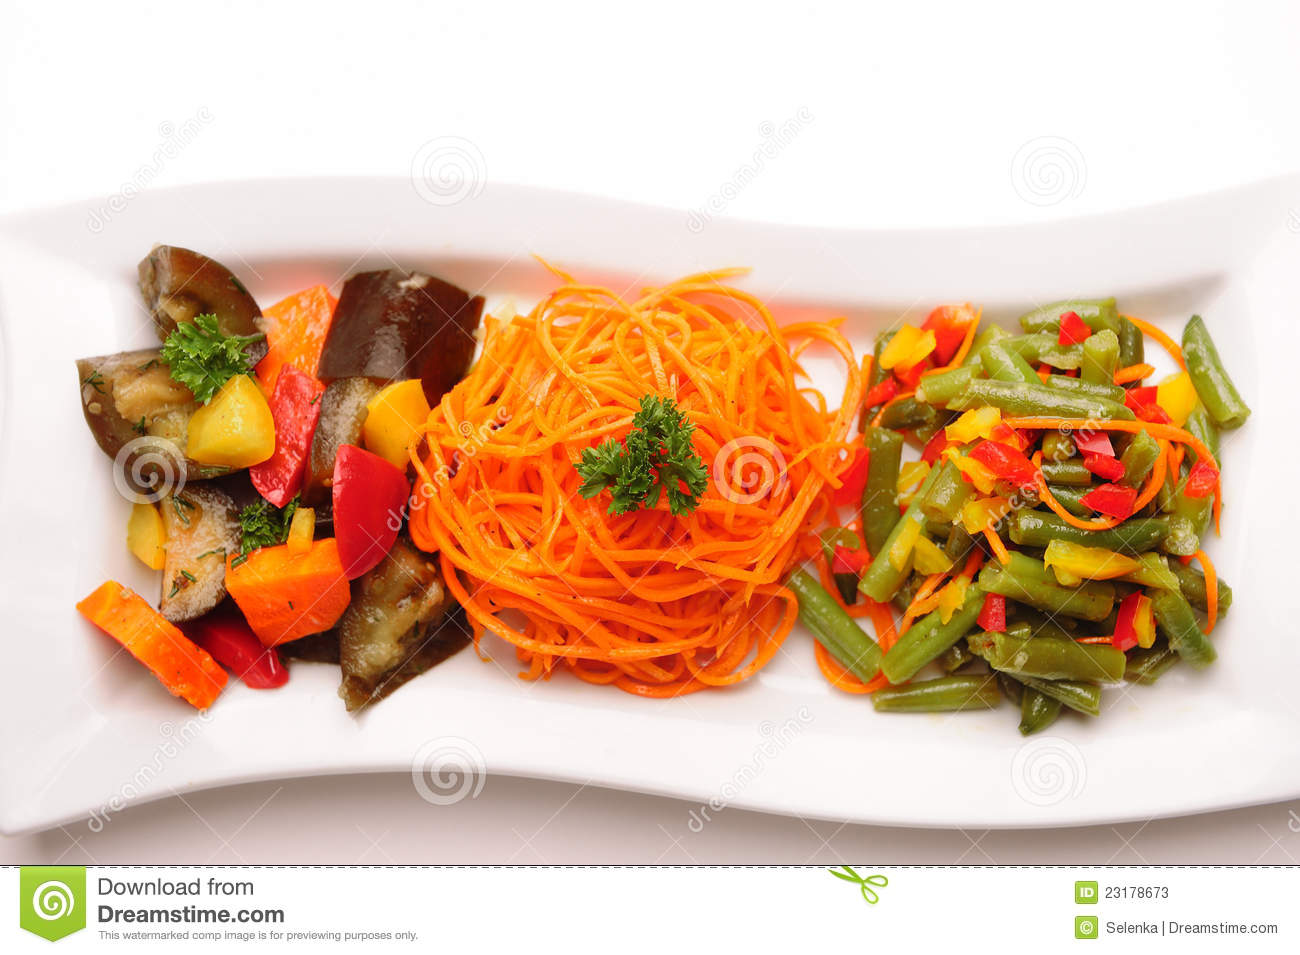 Different Vegetable Salads On A Rectangular Plate On White Background 